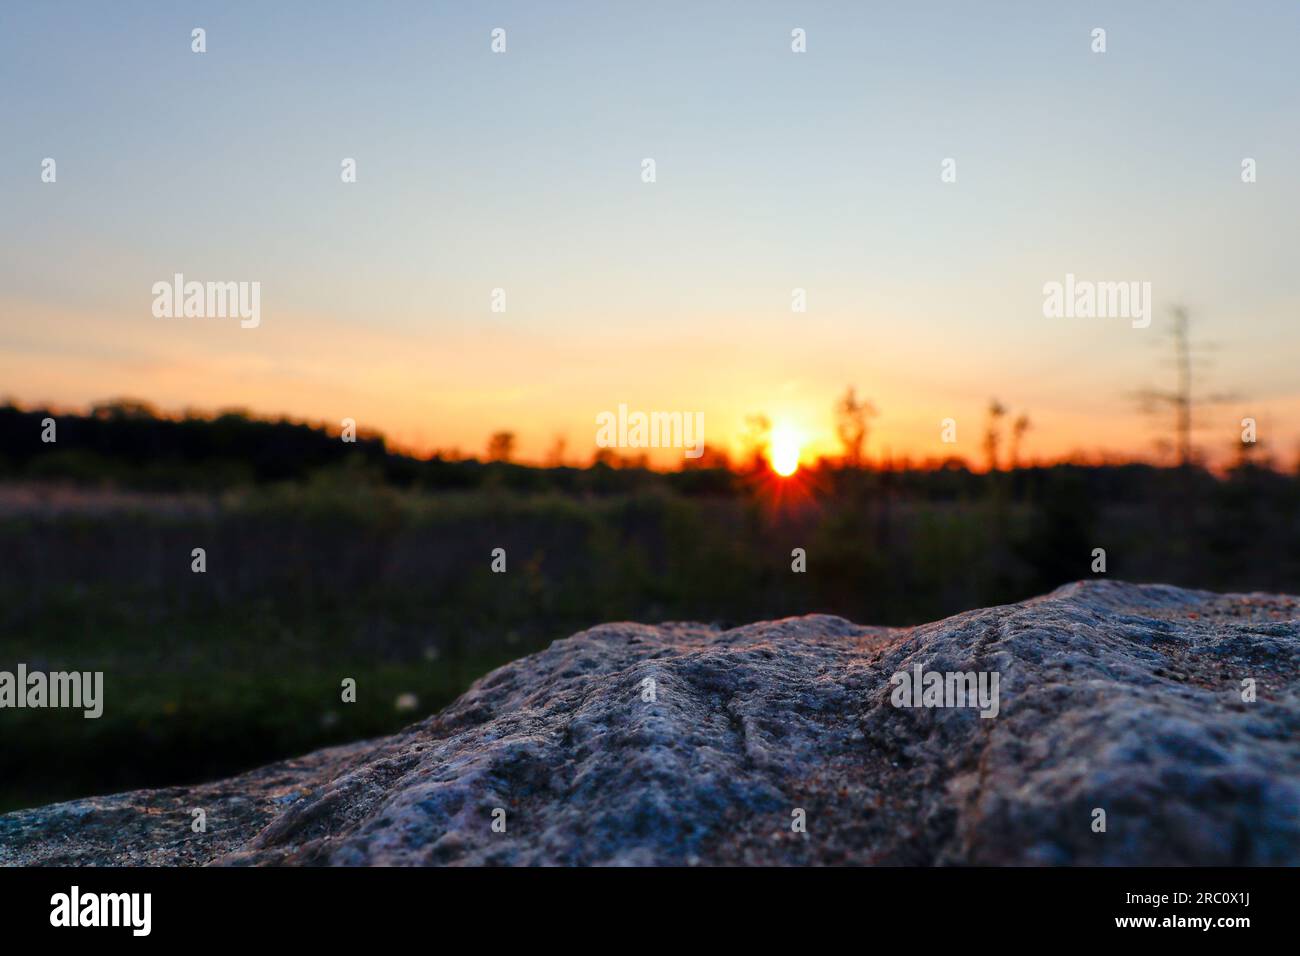 Sunset landscape - grass field - rock in foreground. Taken in Toronto, Canada. Stock Photo